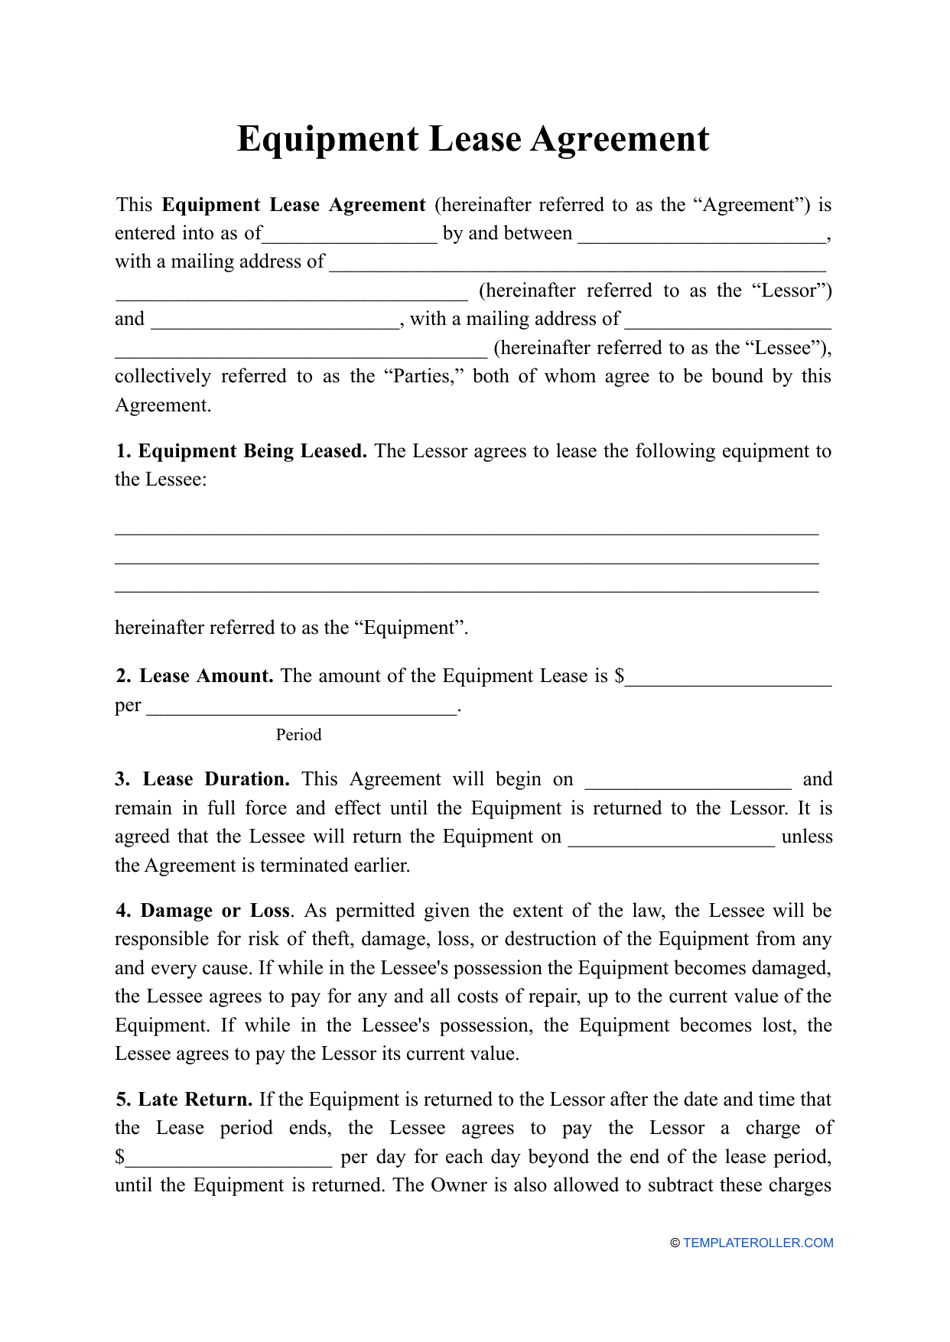 Equipment Lease Agreement Template Download Printable Pdf Templateroller